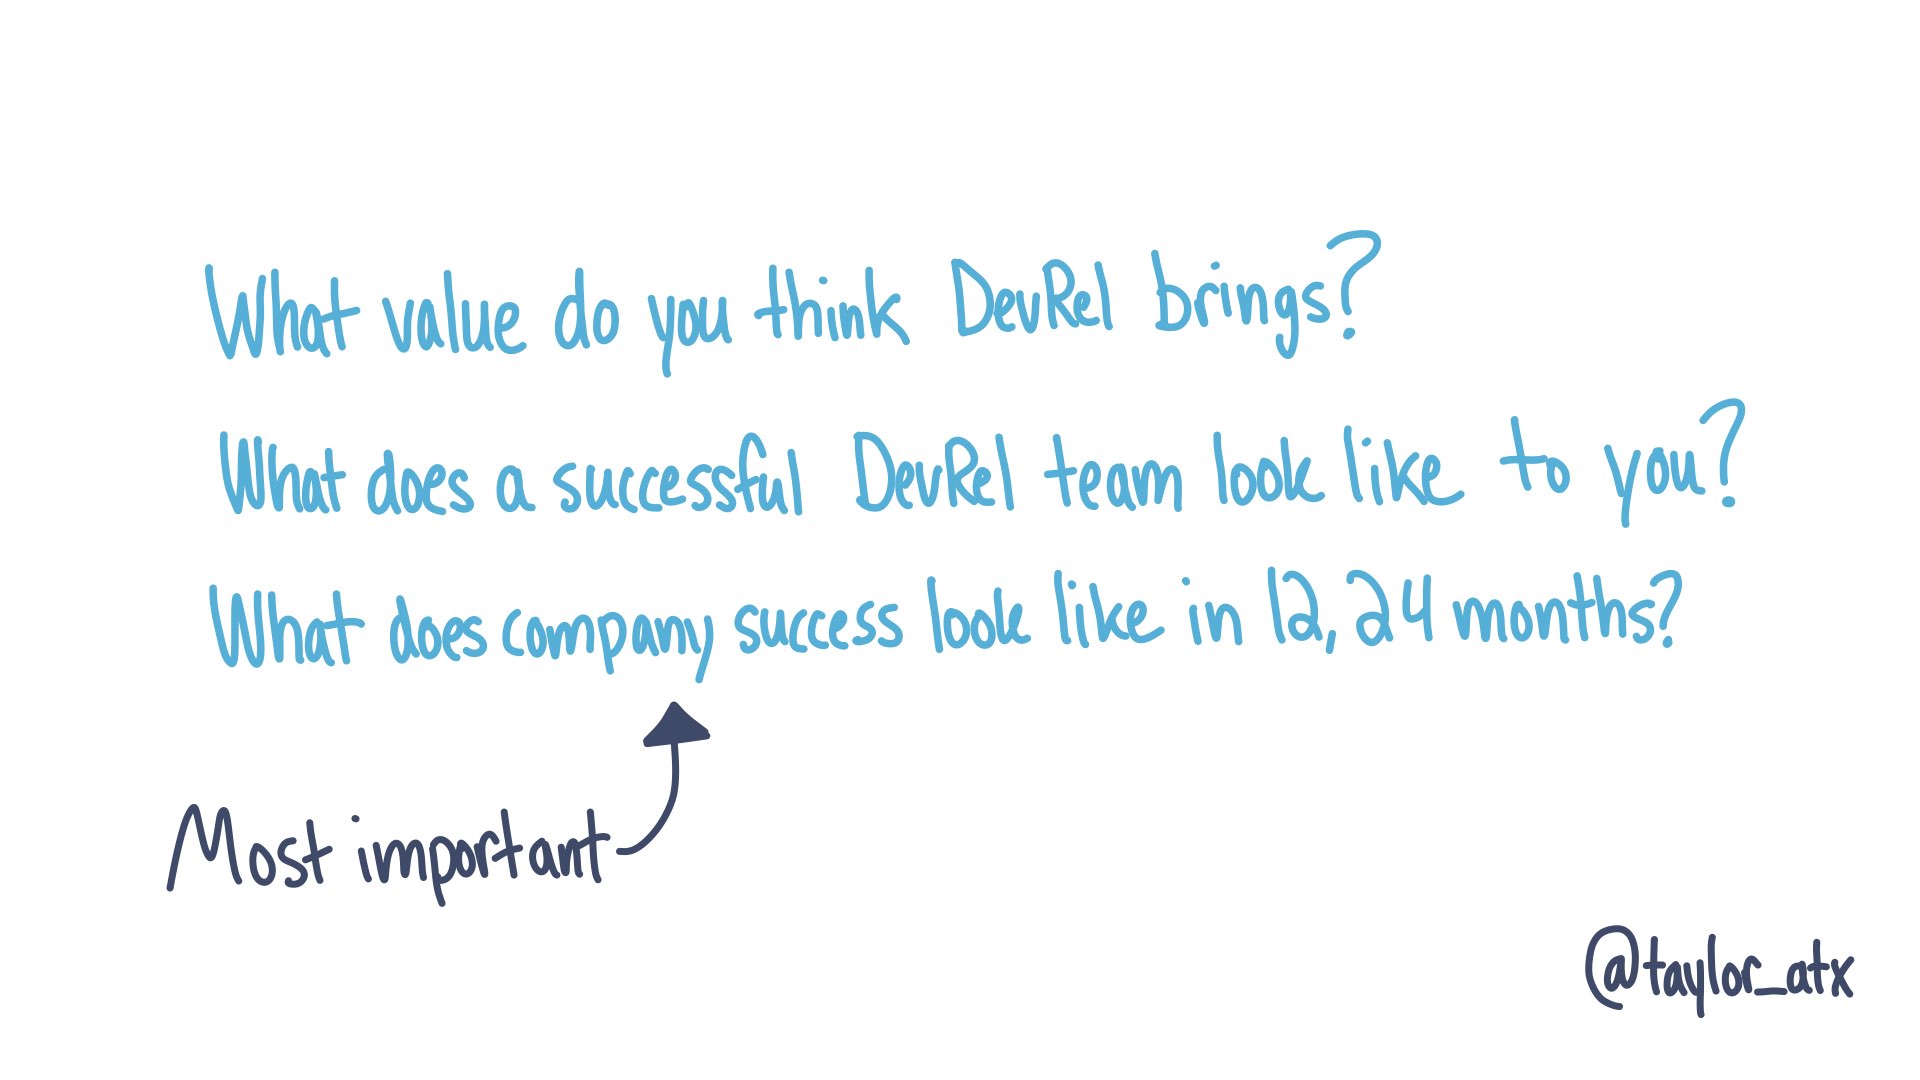 What value do you think DevRel brings? What does a succuesful DevReal team look like to you? What does company success look like in 12, 24 months? (Most important)